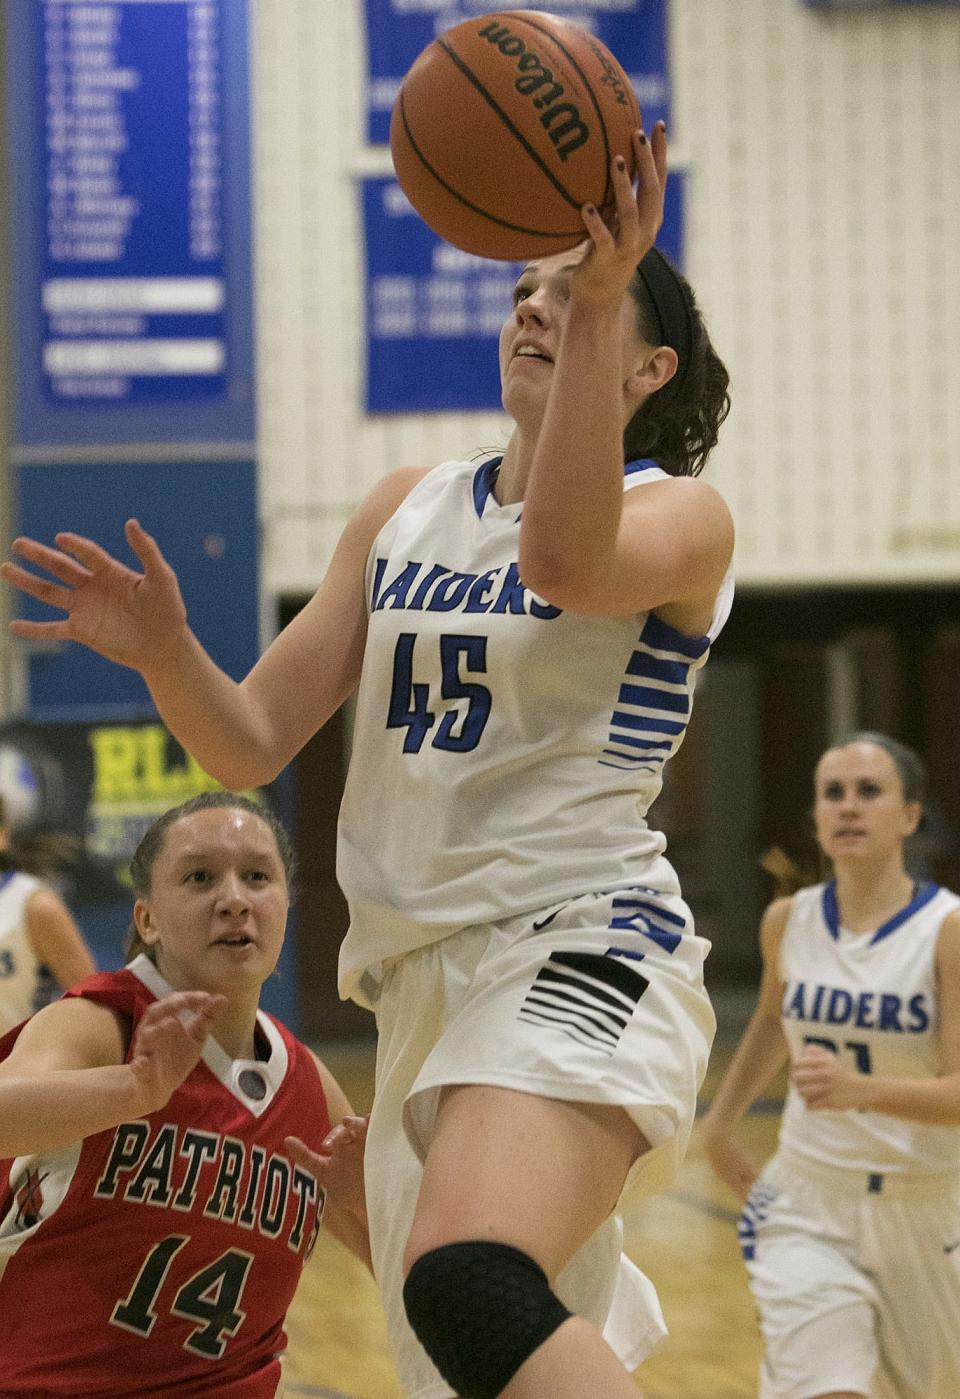 Horseheads' Amanda Schiefen goes up for a shot during the 2014-15 season.